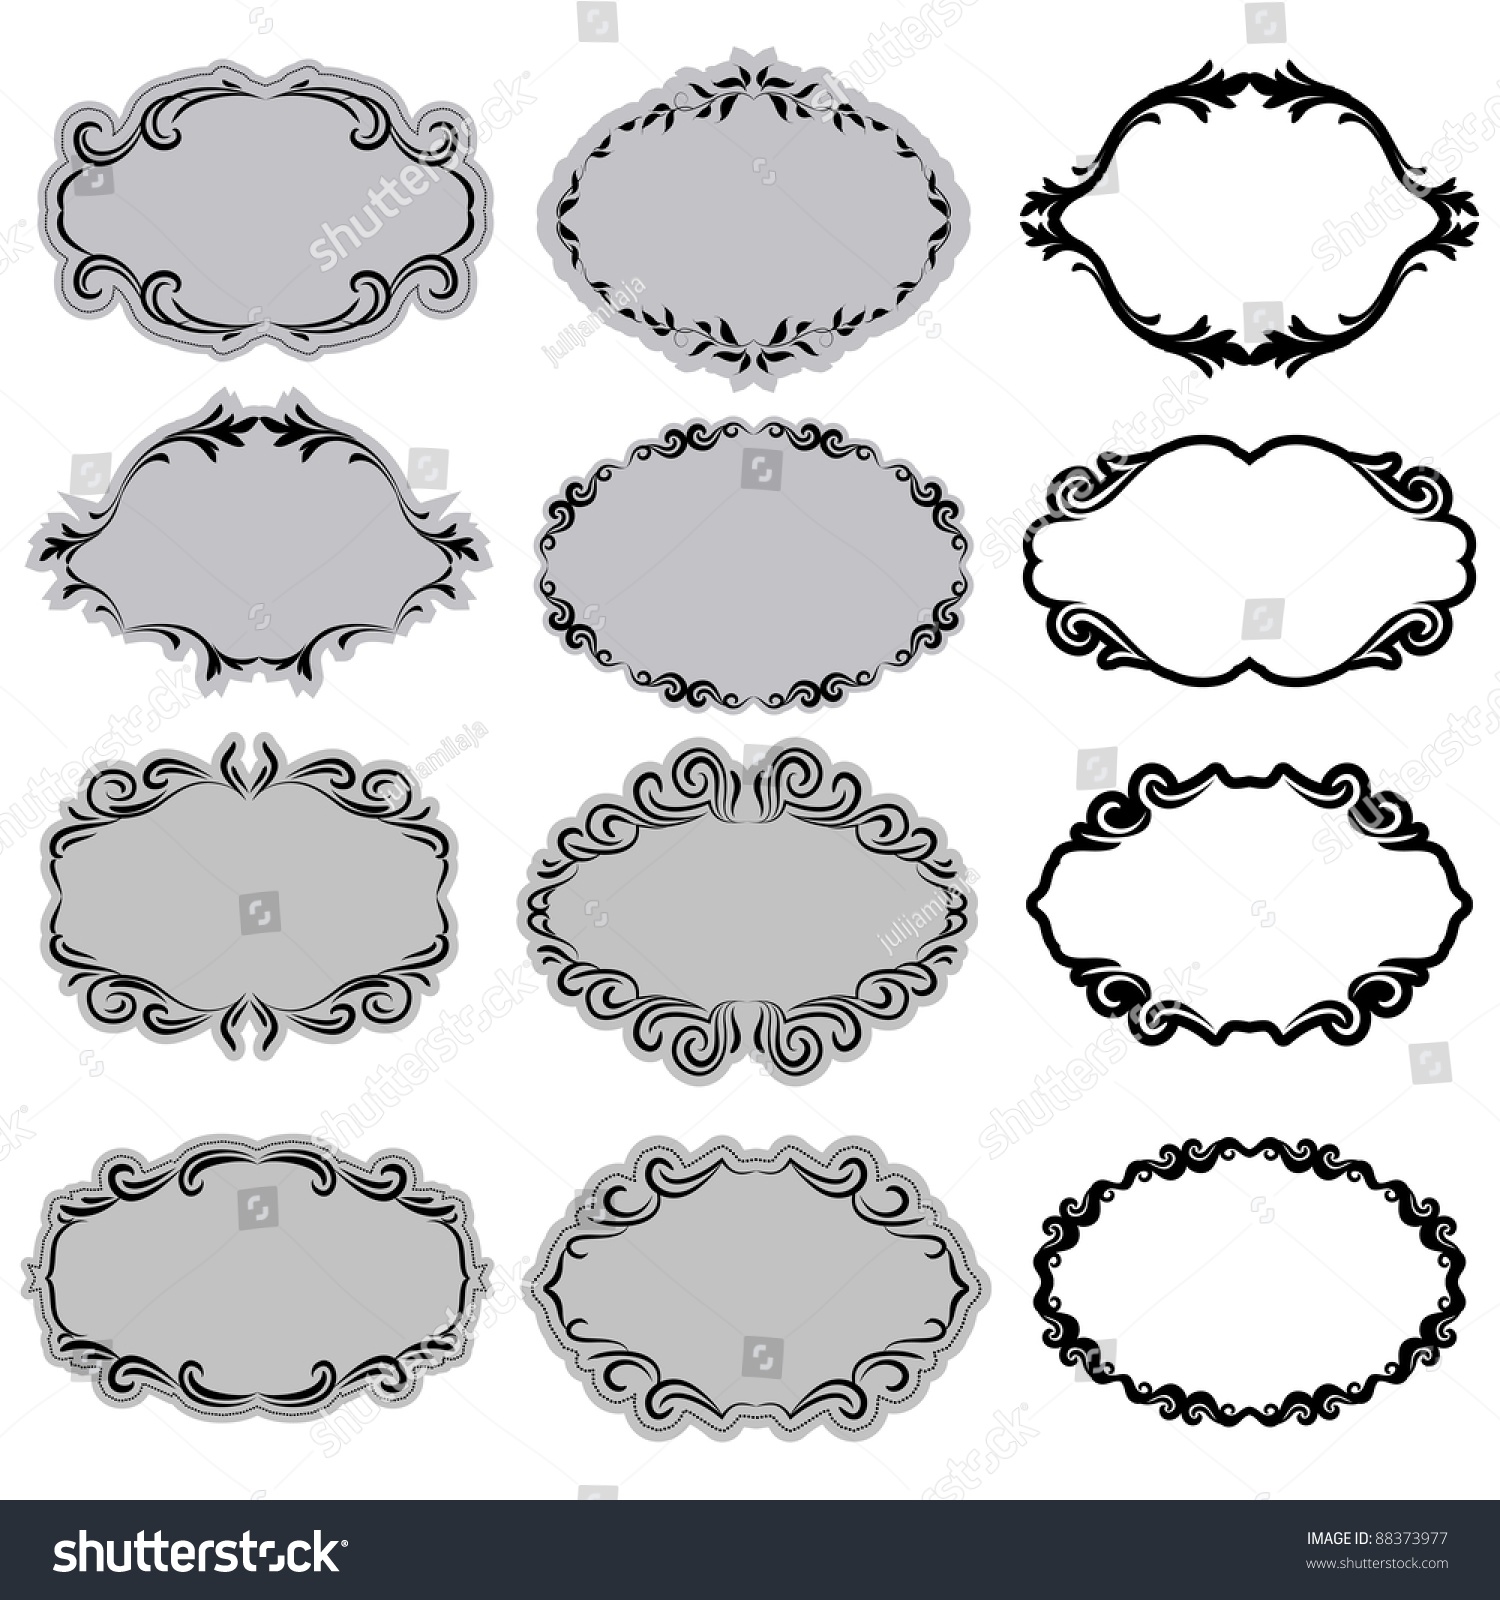 Set Of Ornate Vector Frames . In Vintage Style. Basic Elements Are